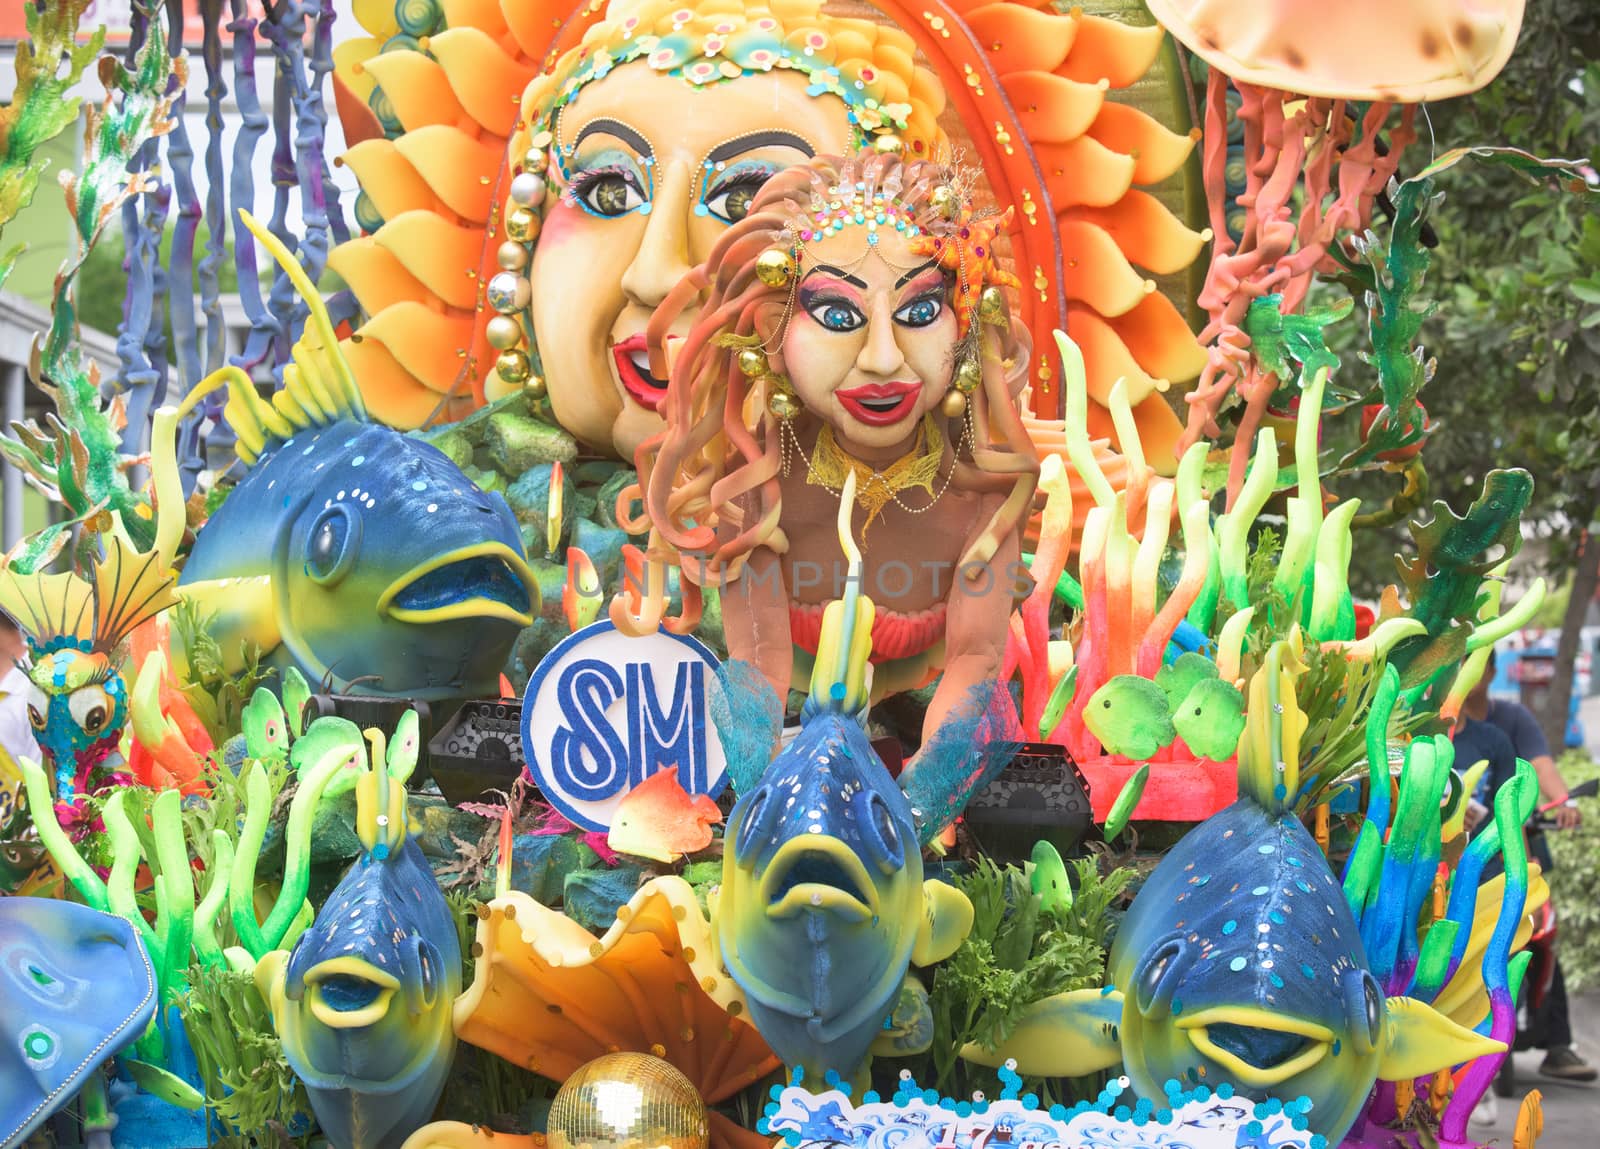 General Santos City, The Philippines - September 1, 2015: Parade float at the opening day of the 17th Annual Gensan Tuna Festival to celebrate the  most important industry of city, the tuna canneries.